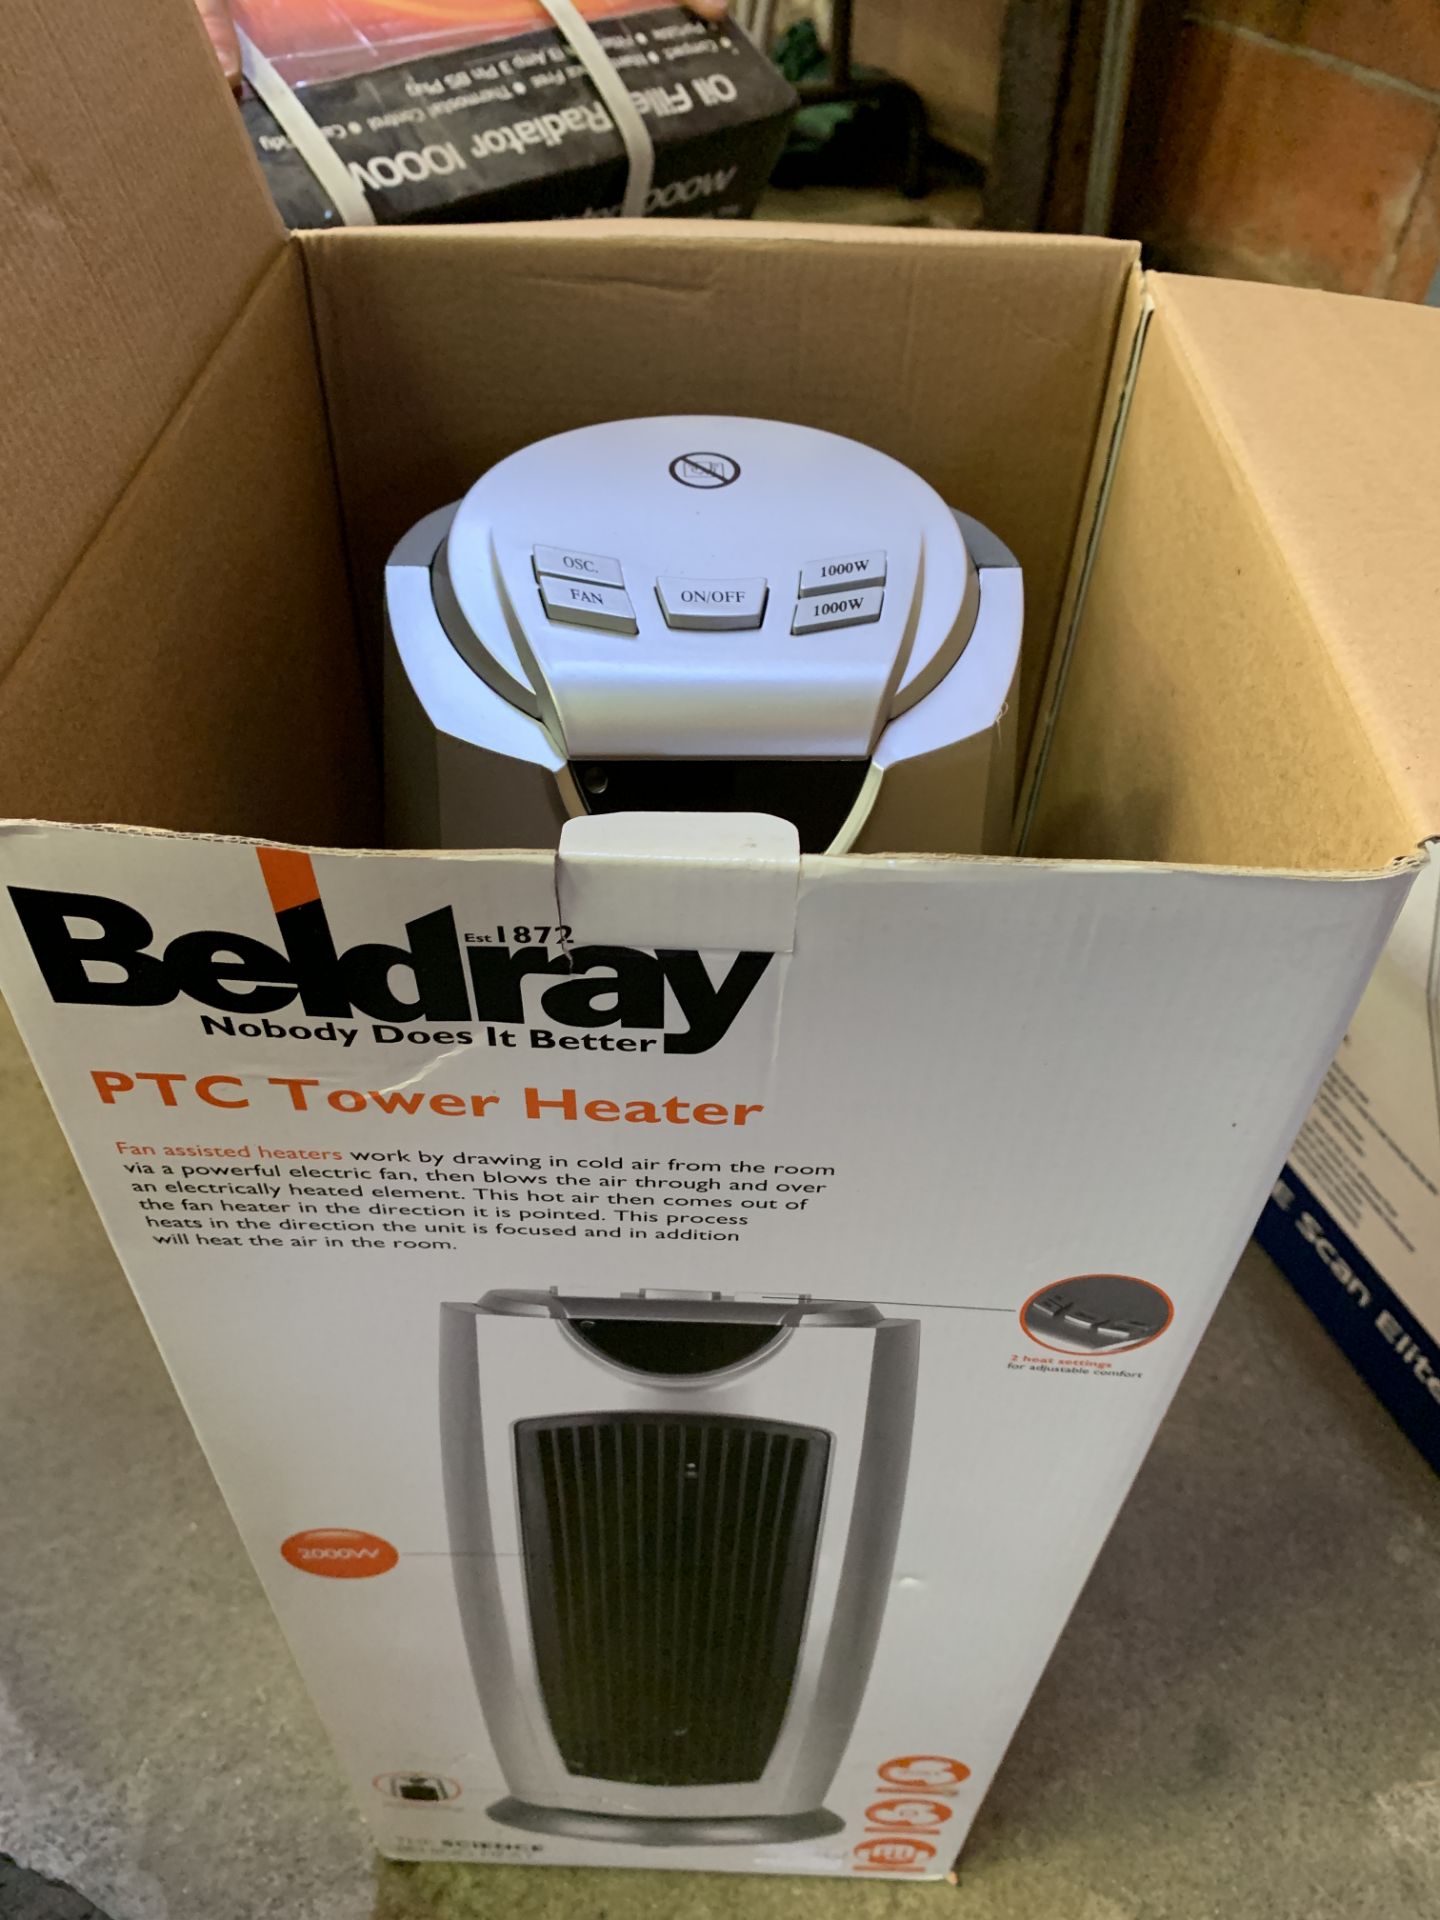 A Beldray tower heater in box, together with a boxed oil filled radiator